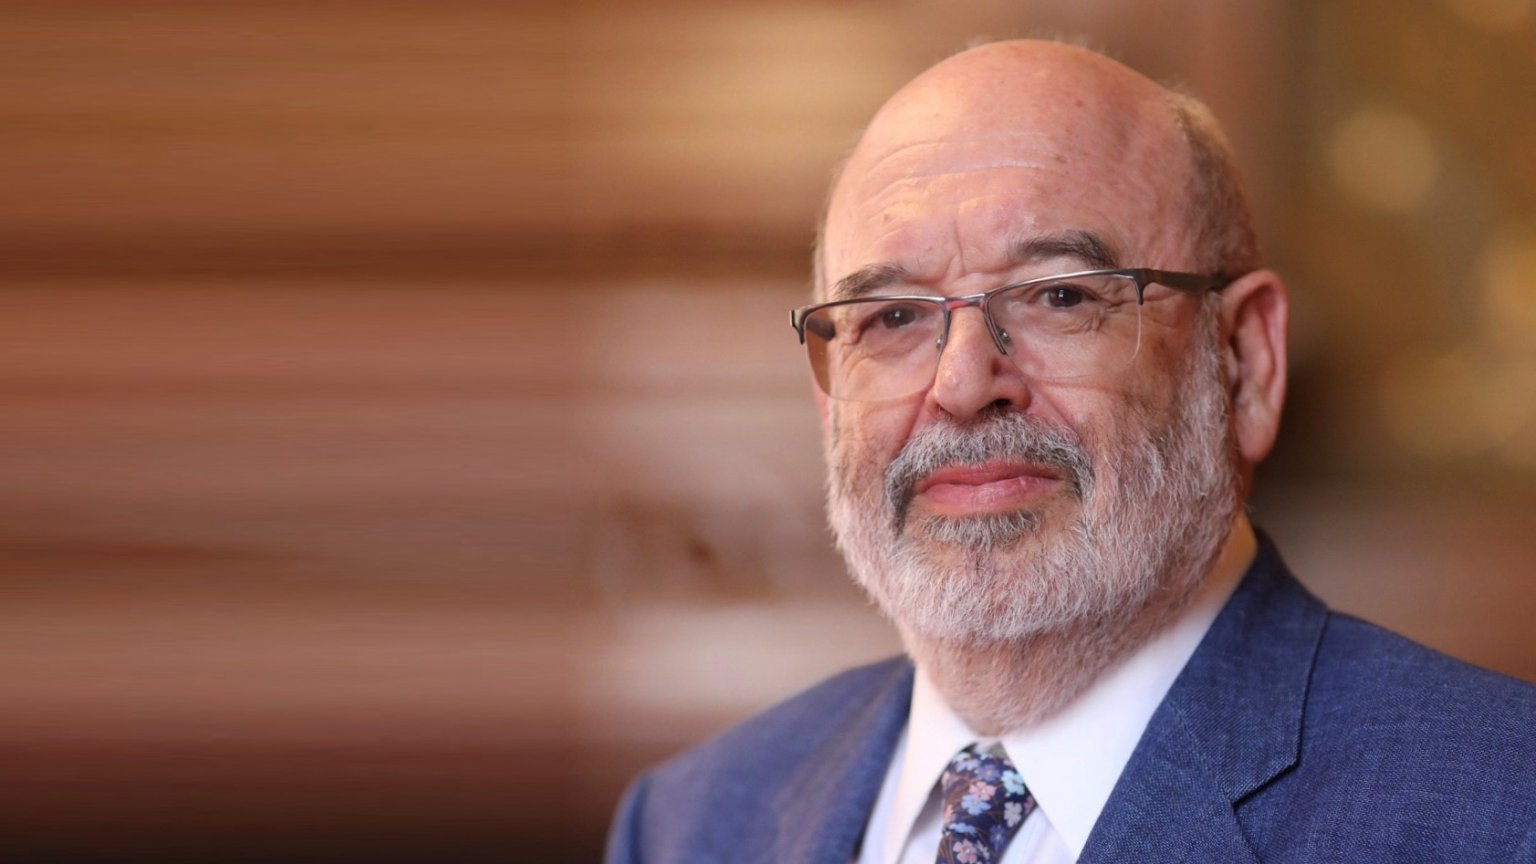 Peter Gluckman: Reflections on the evidentiary-politics interface